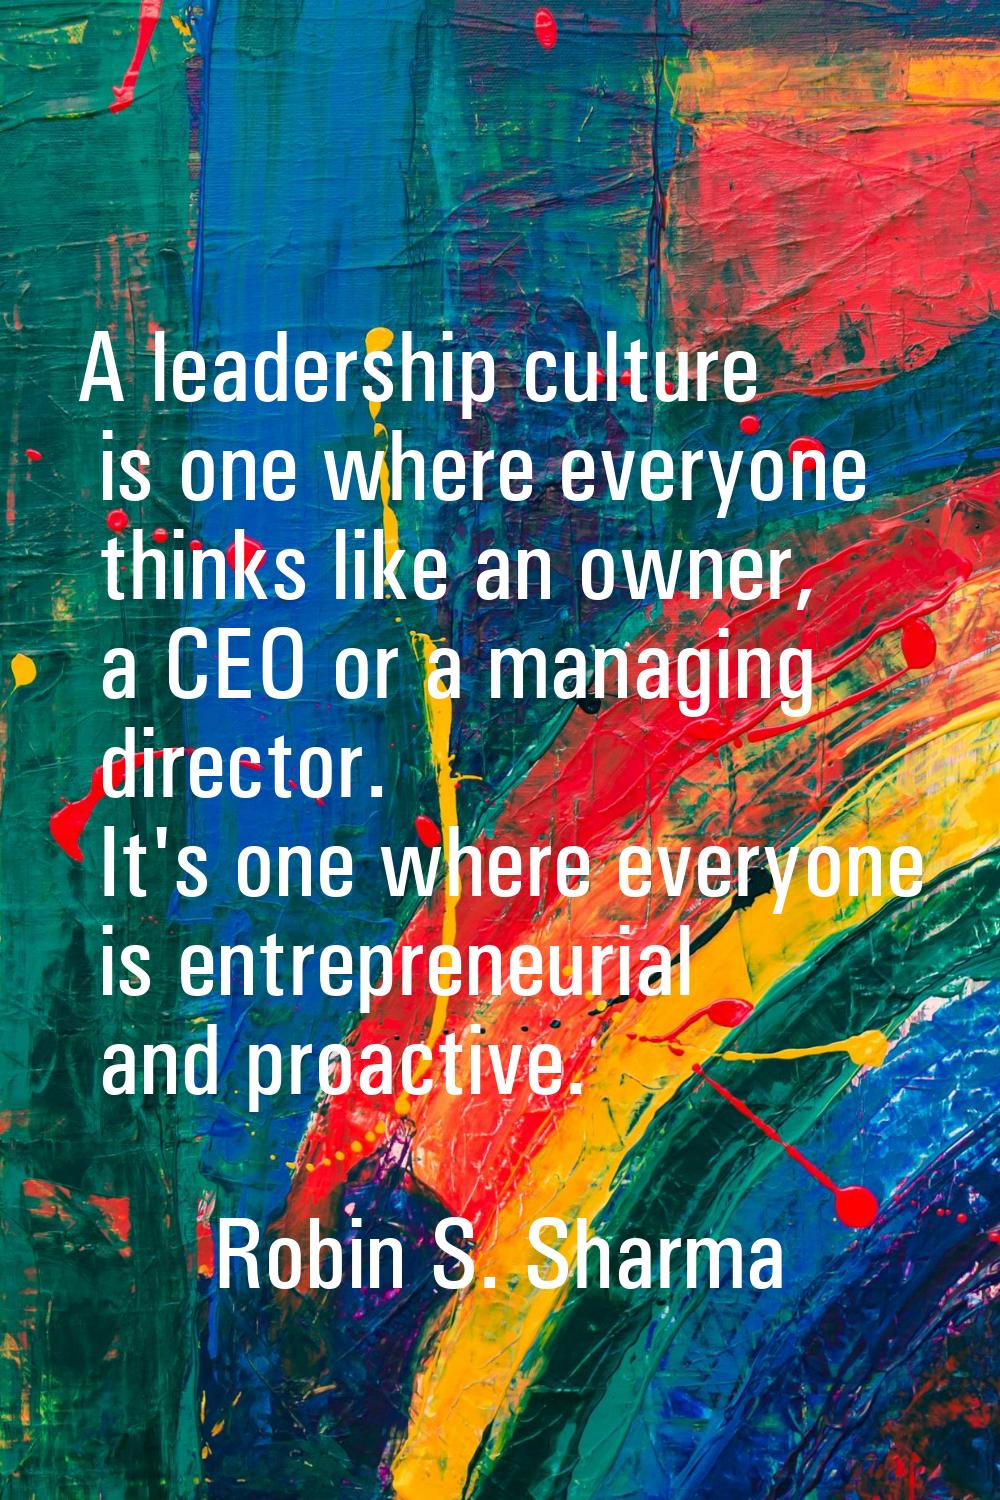 A leadership culture is one where everyone thinks like an owner, a CEO or a managing director. It's